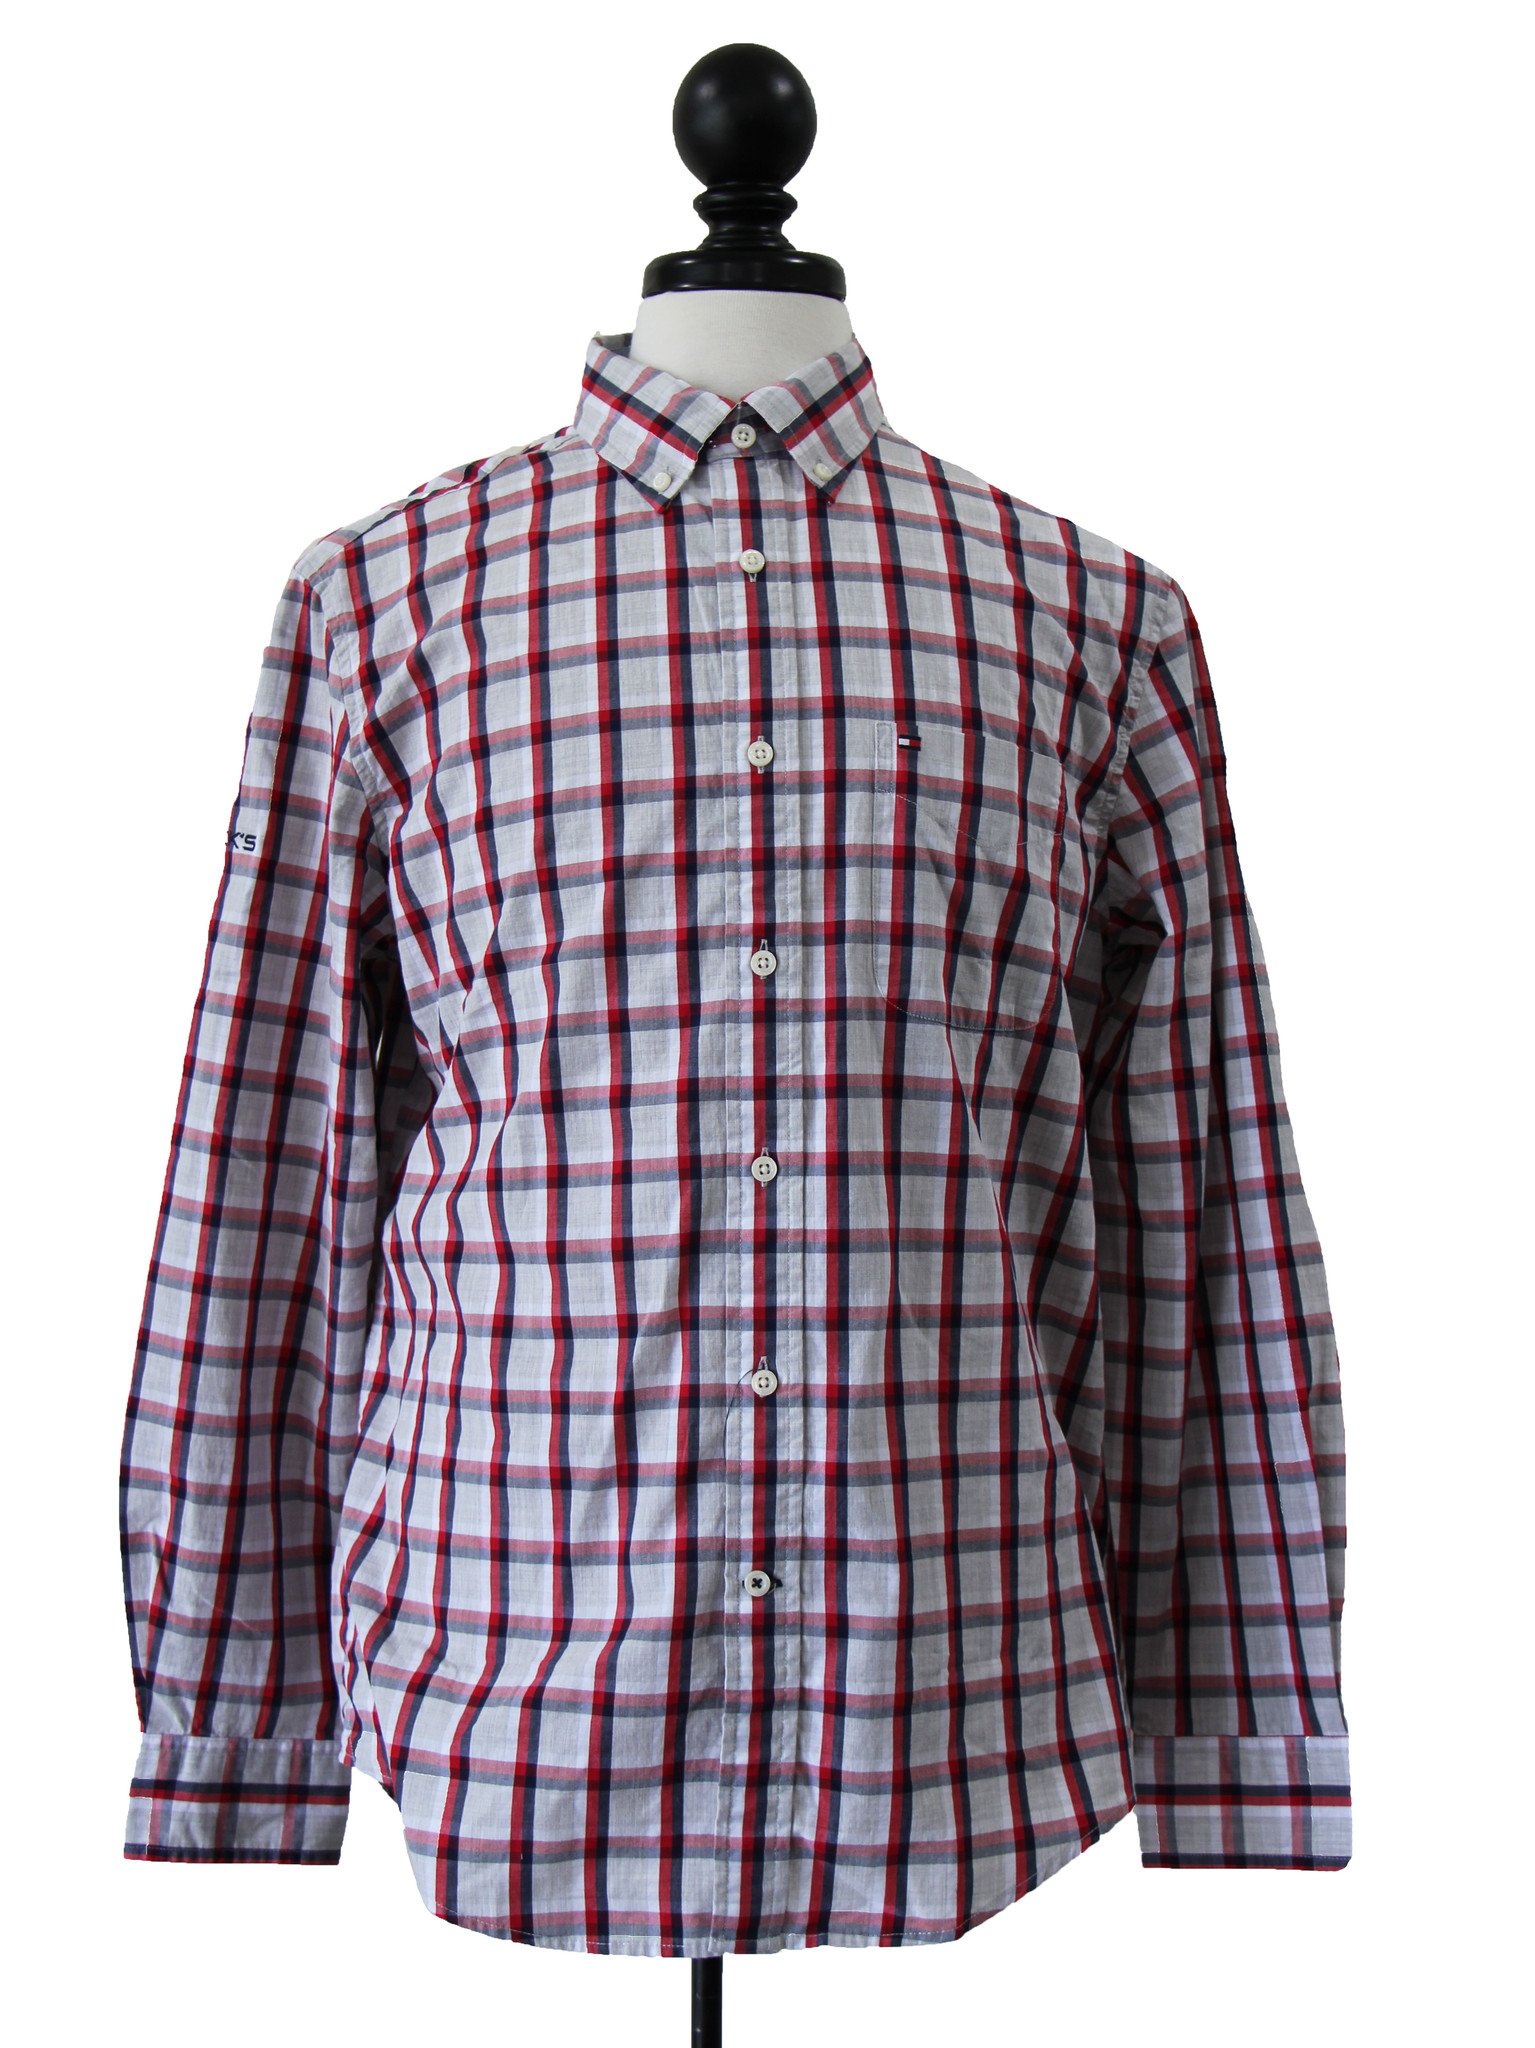 Hilfiger L/S Button Down - Beck's Country Store